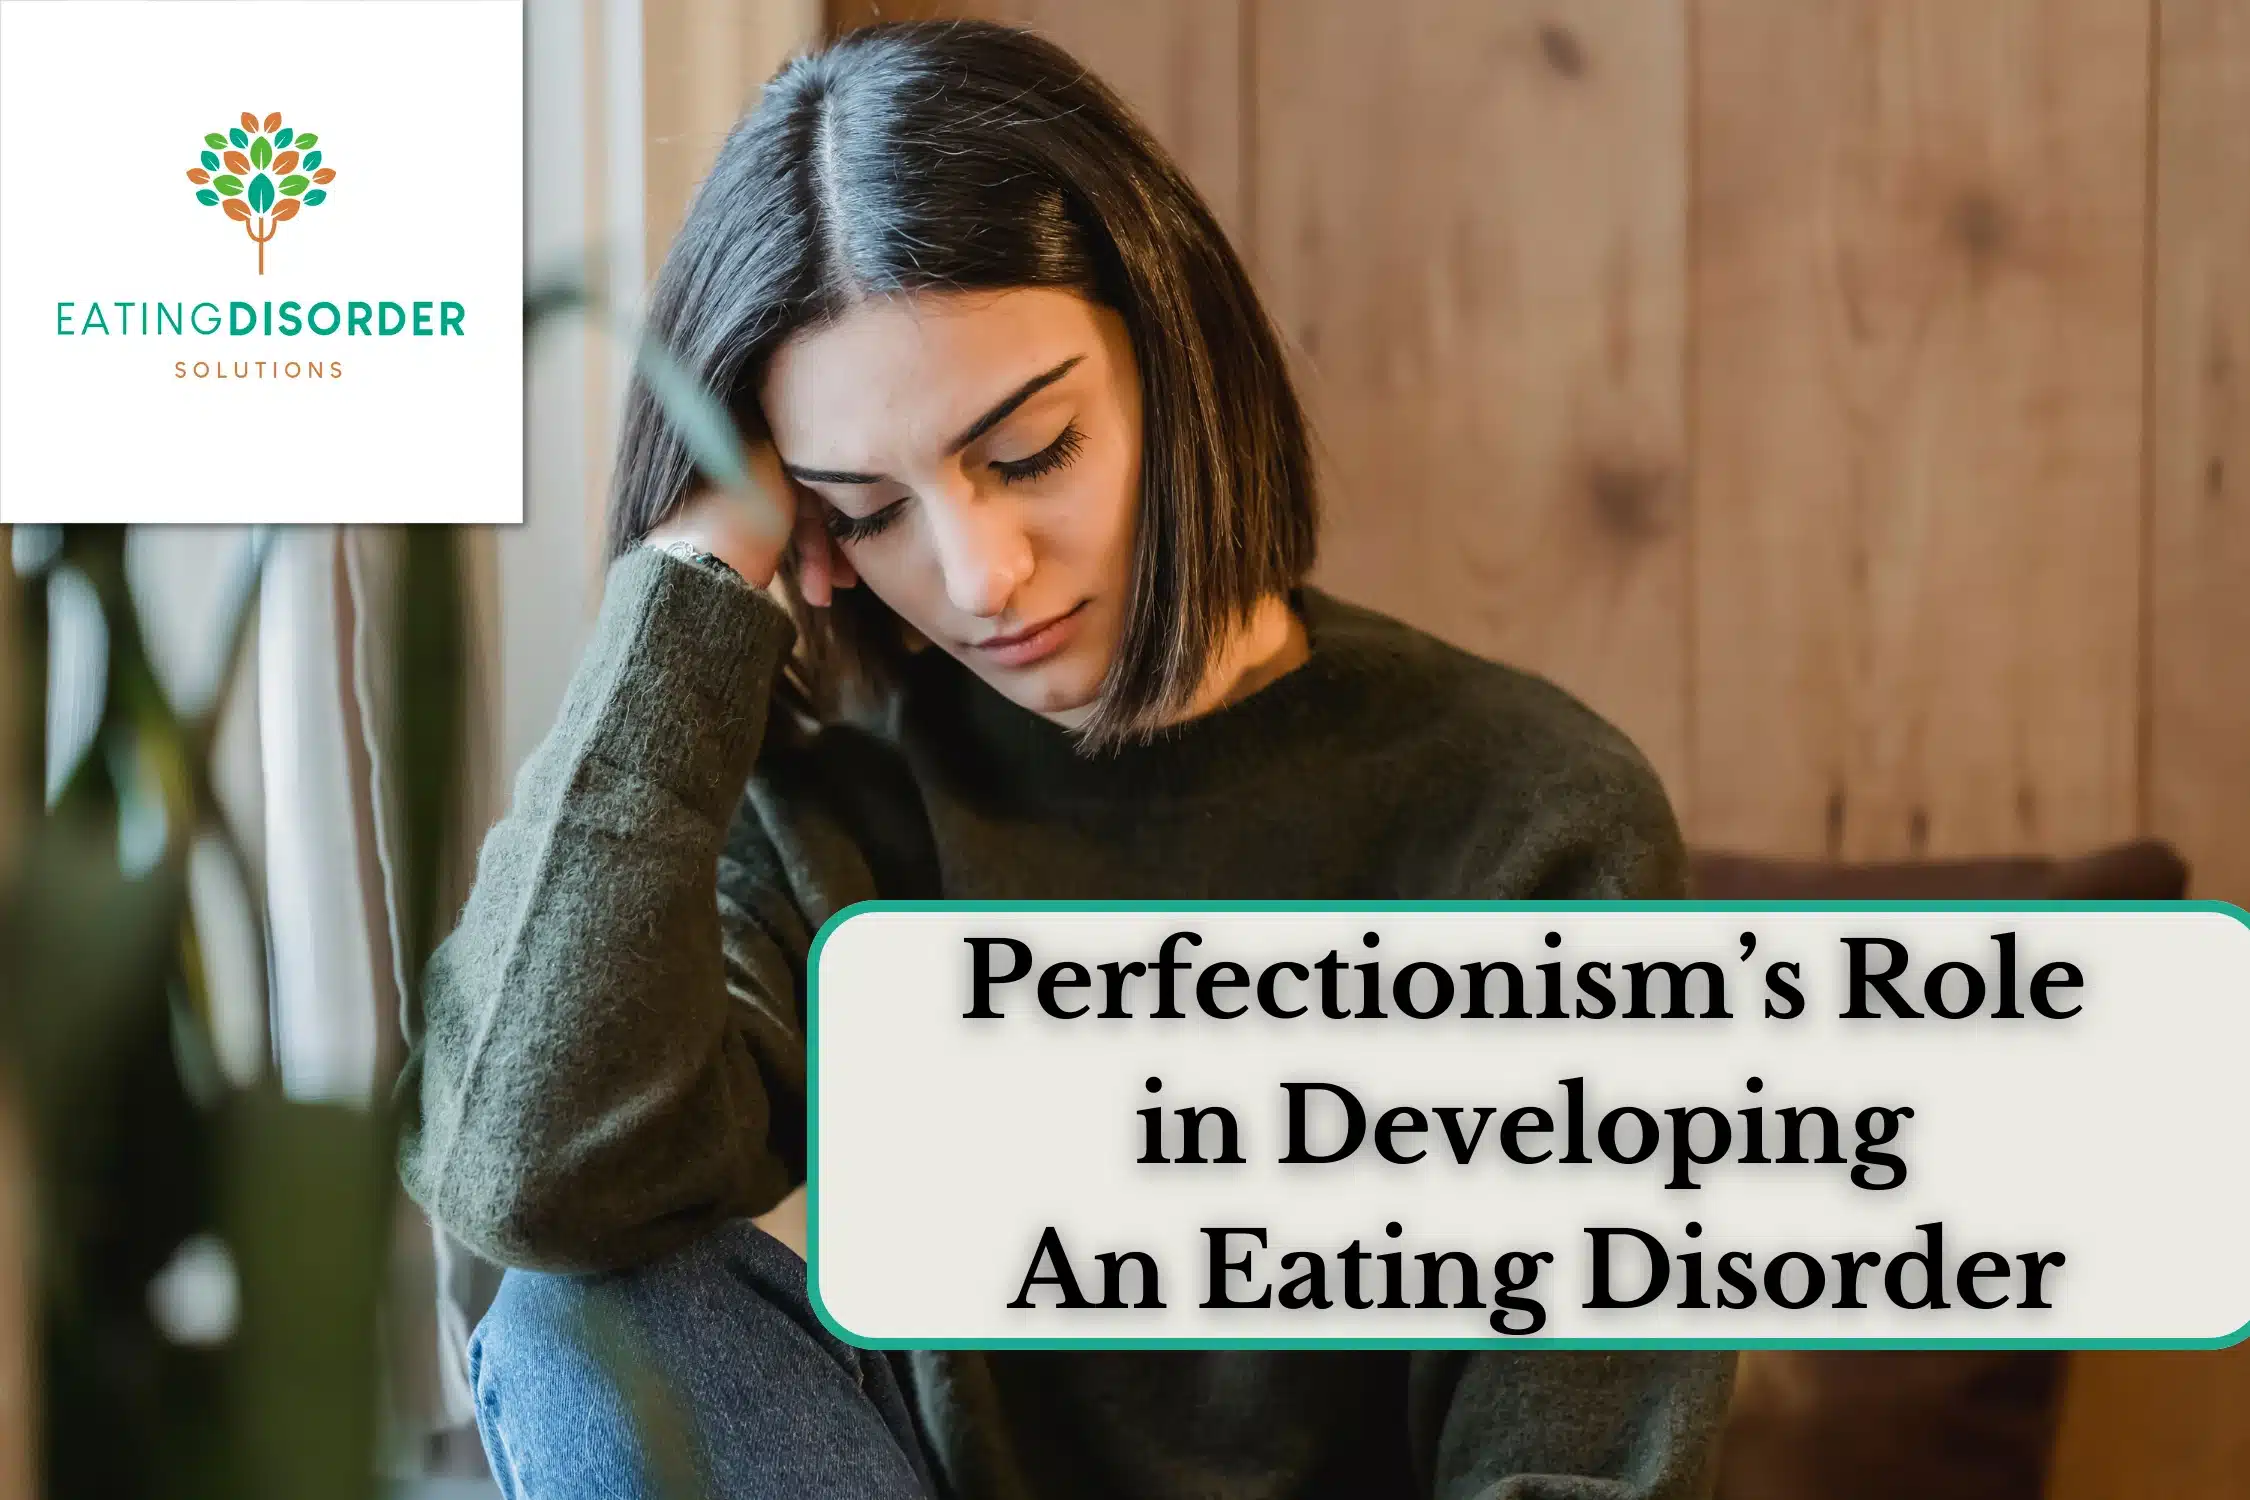 Perfectionism and eating disorders